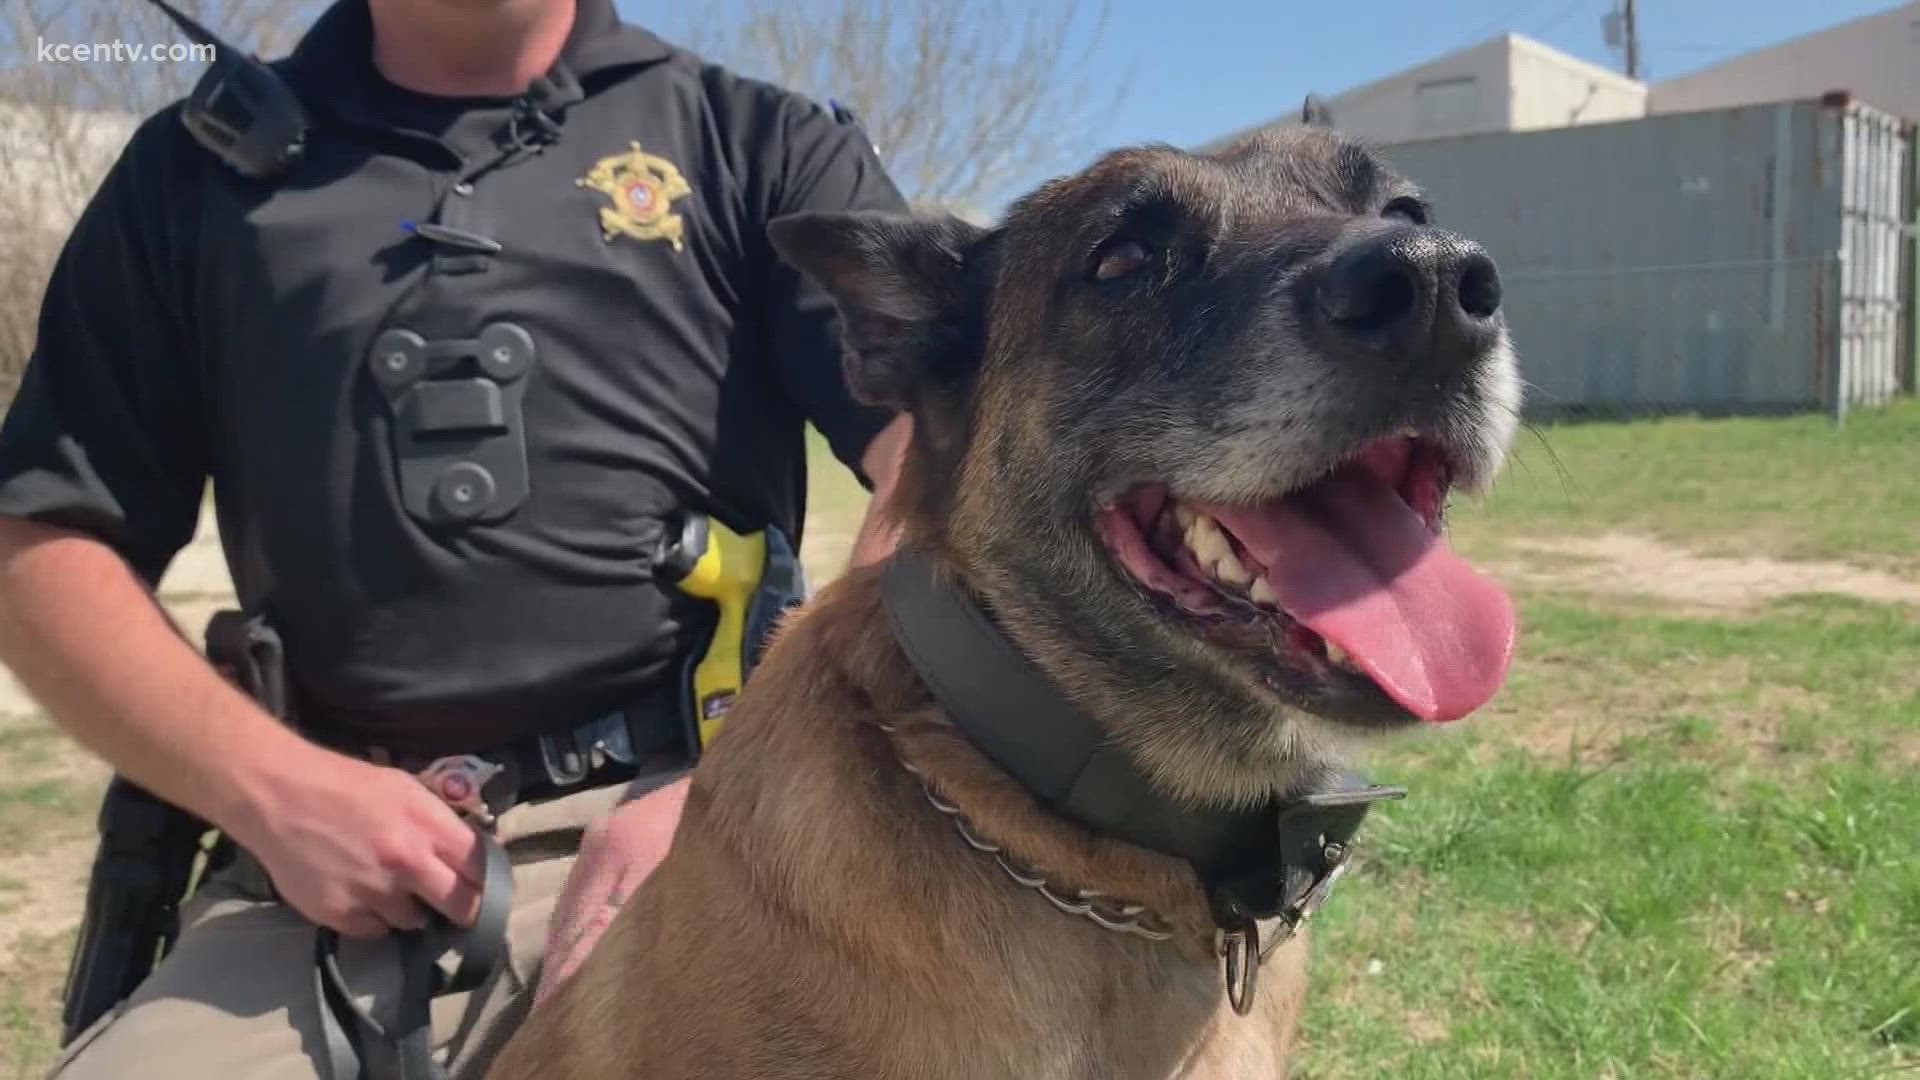 While the Coryell County Sheriff's Office does have a budget allocated for their K9 program, it doesn't cover what the K9 Stana needs to get healthy.